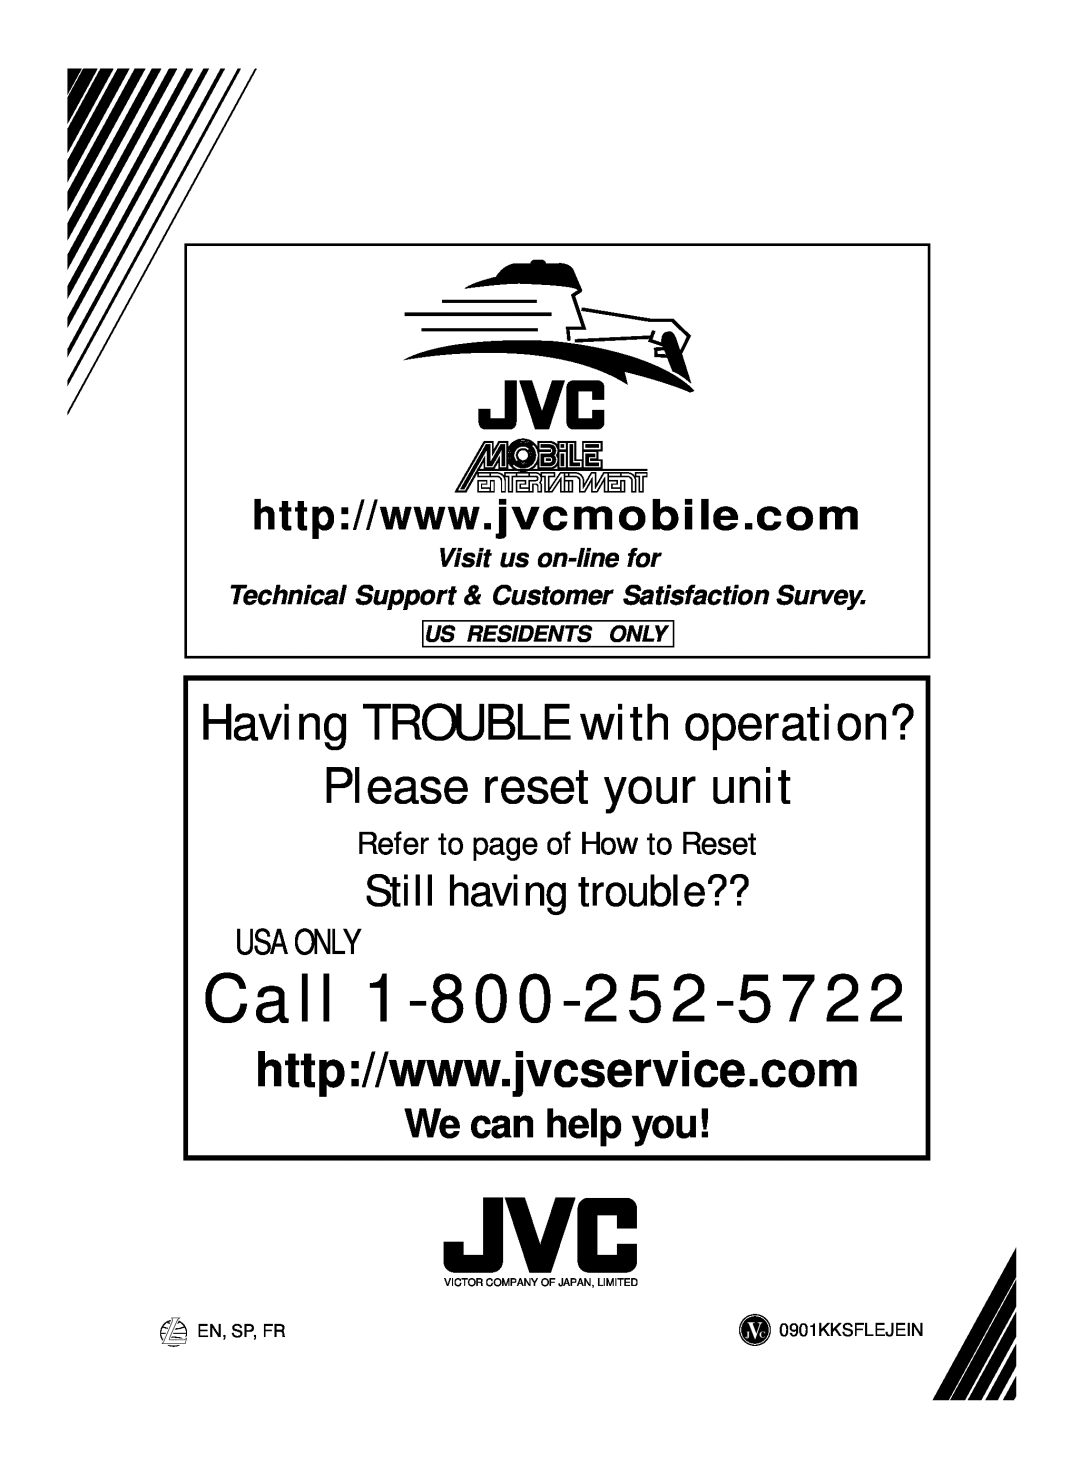 JVC KS-FX210 Having TROUBLE with operation?, We can help you, Us Residents Only, Call, Please reset your unit, Usa Only 